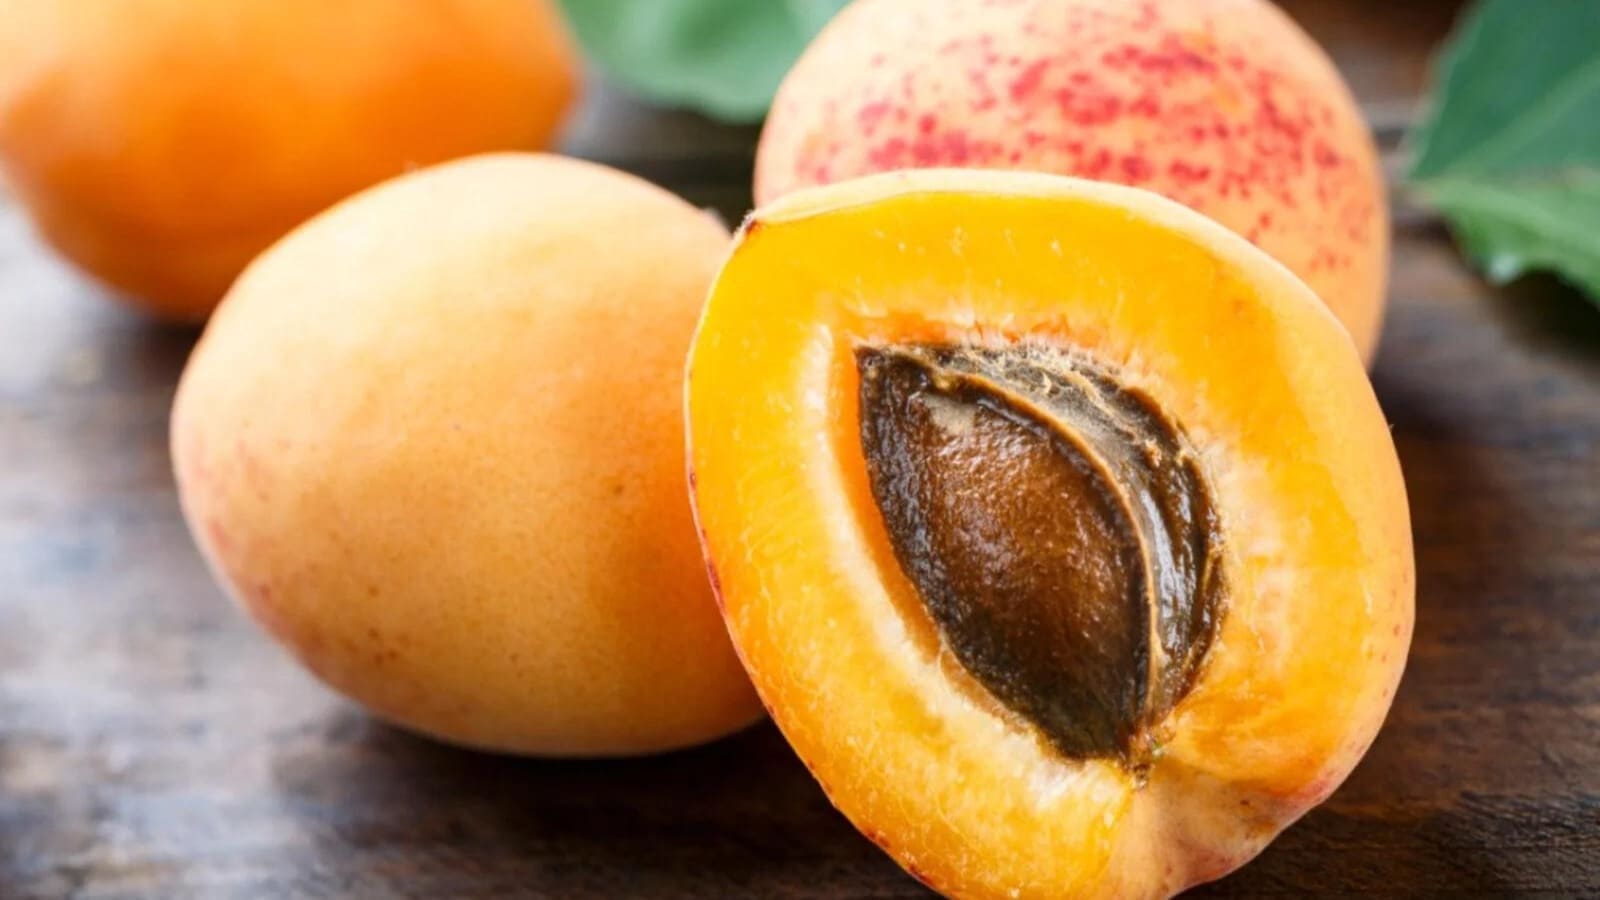 Kern Tec secures US$12.7M funding to produce sustainable ingredients from stone fruit pits